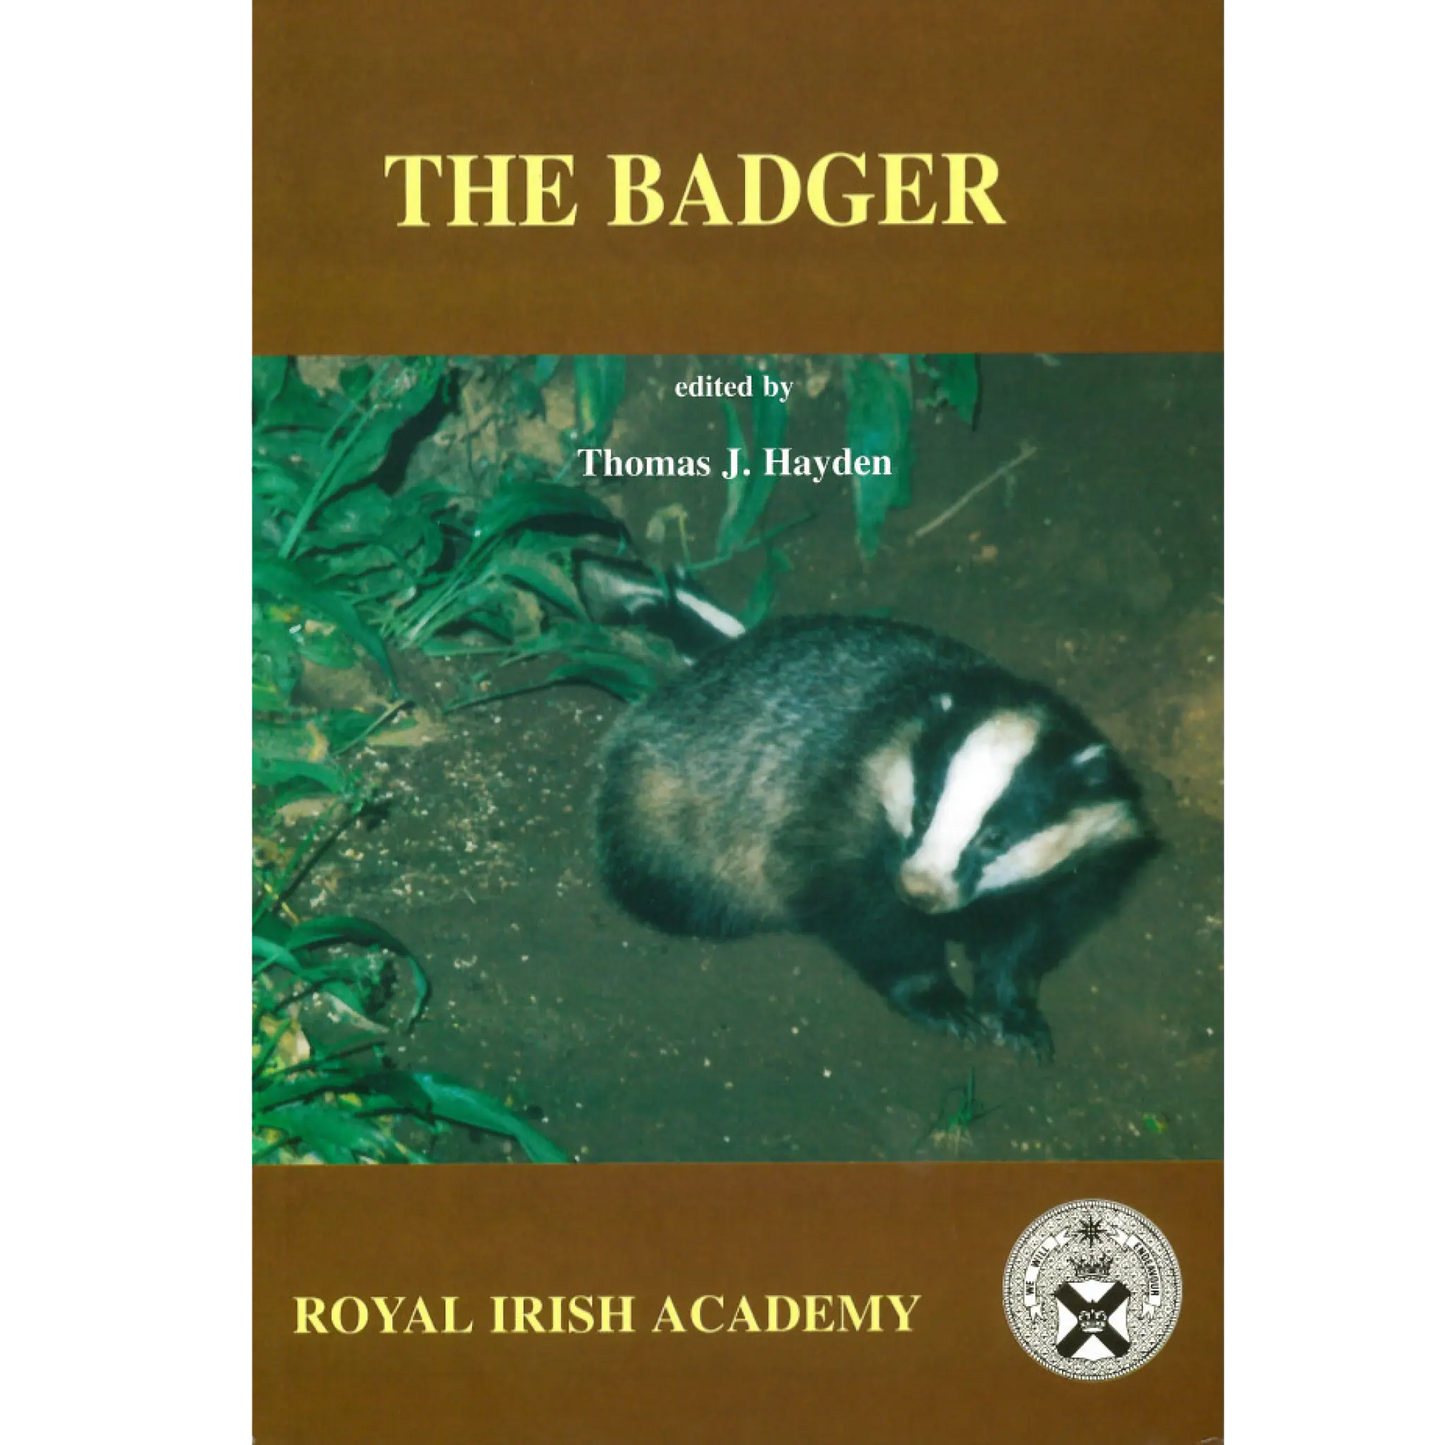 Badger, The: Proceedings of a Seminar Held on 6-7 March 1991